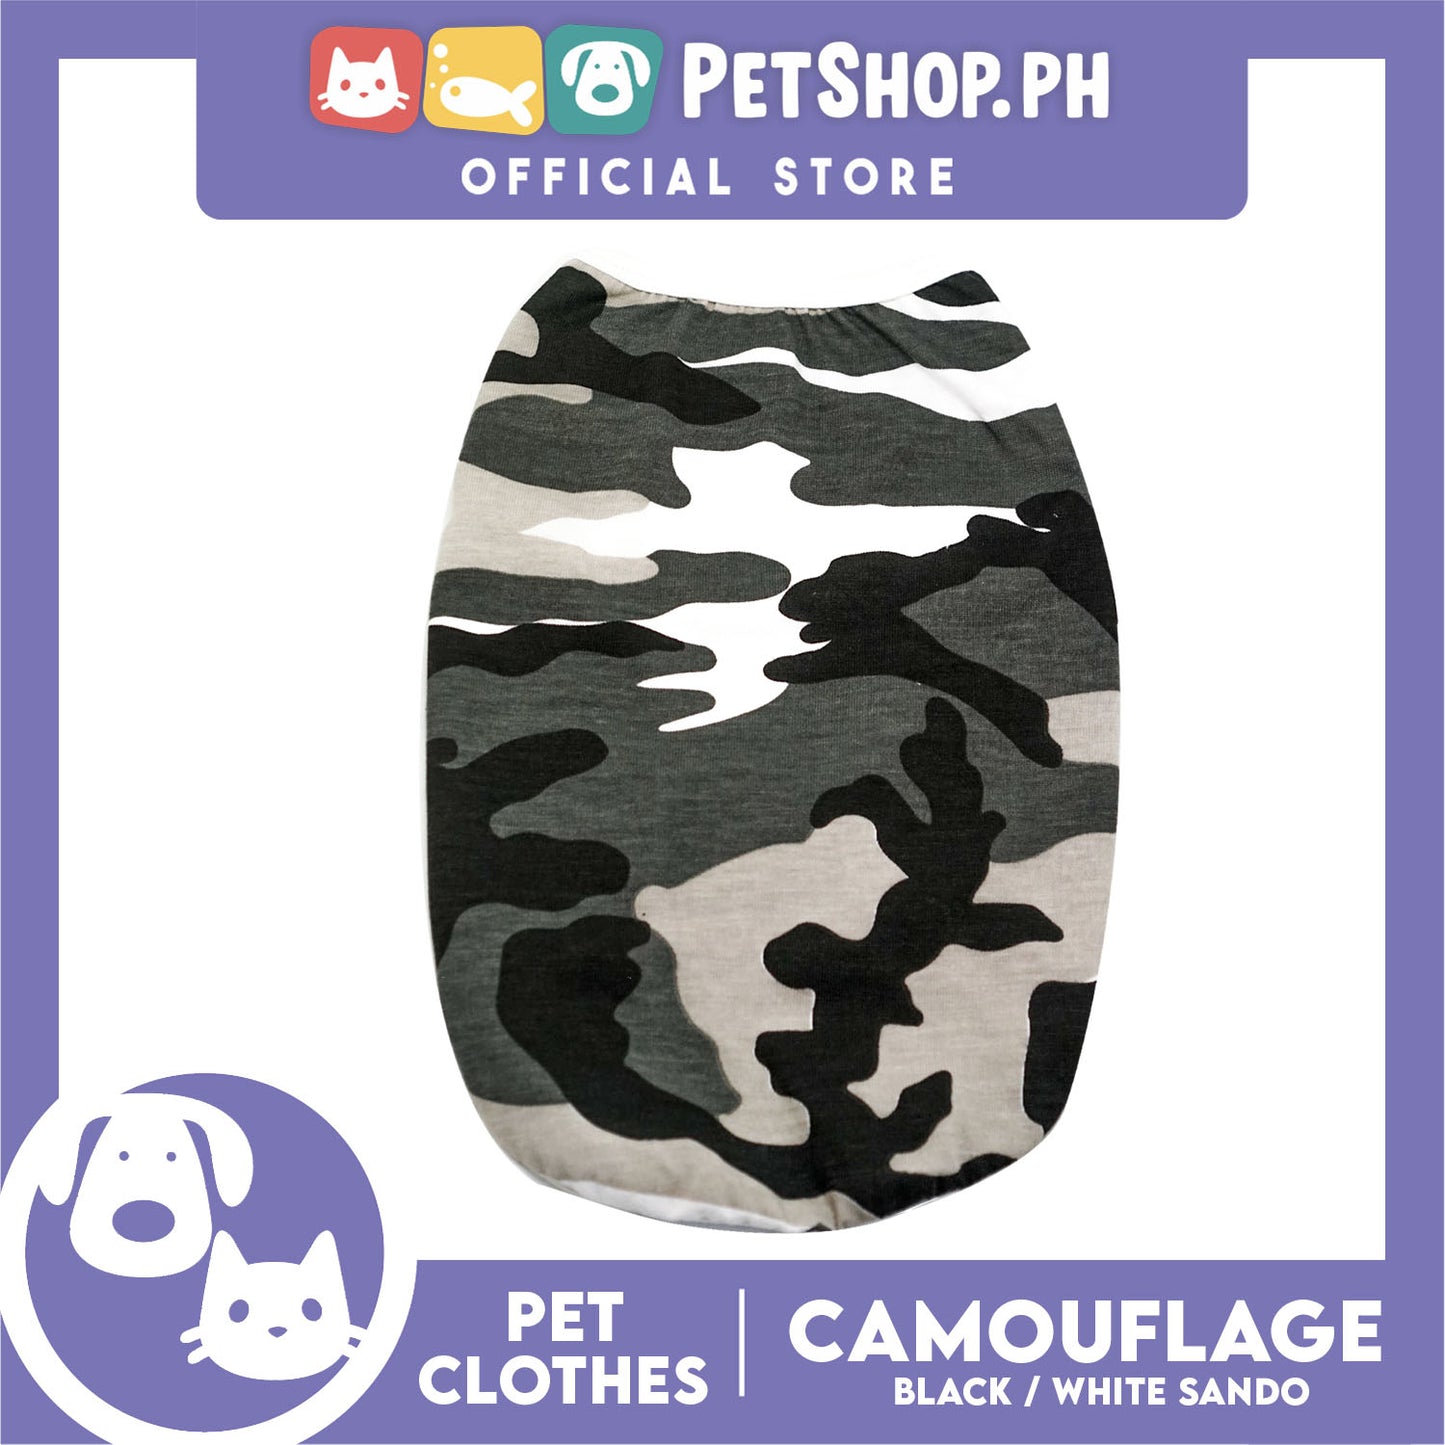 Pet Shirt Camouflage Black and White Sando (Small) Perfect Shirt for Male Dogs and Cats